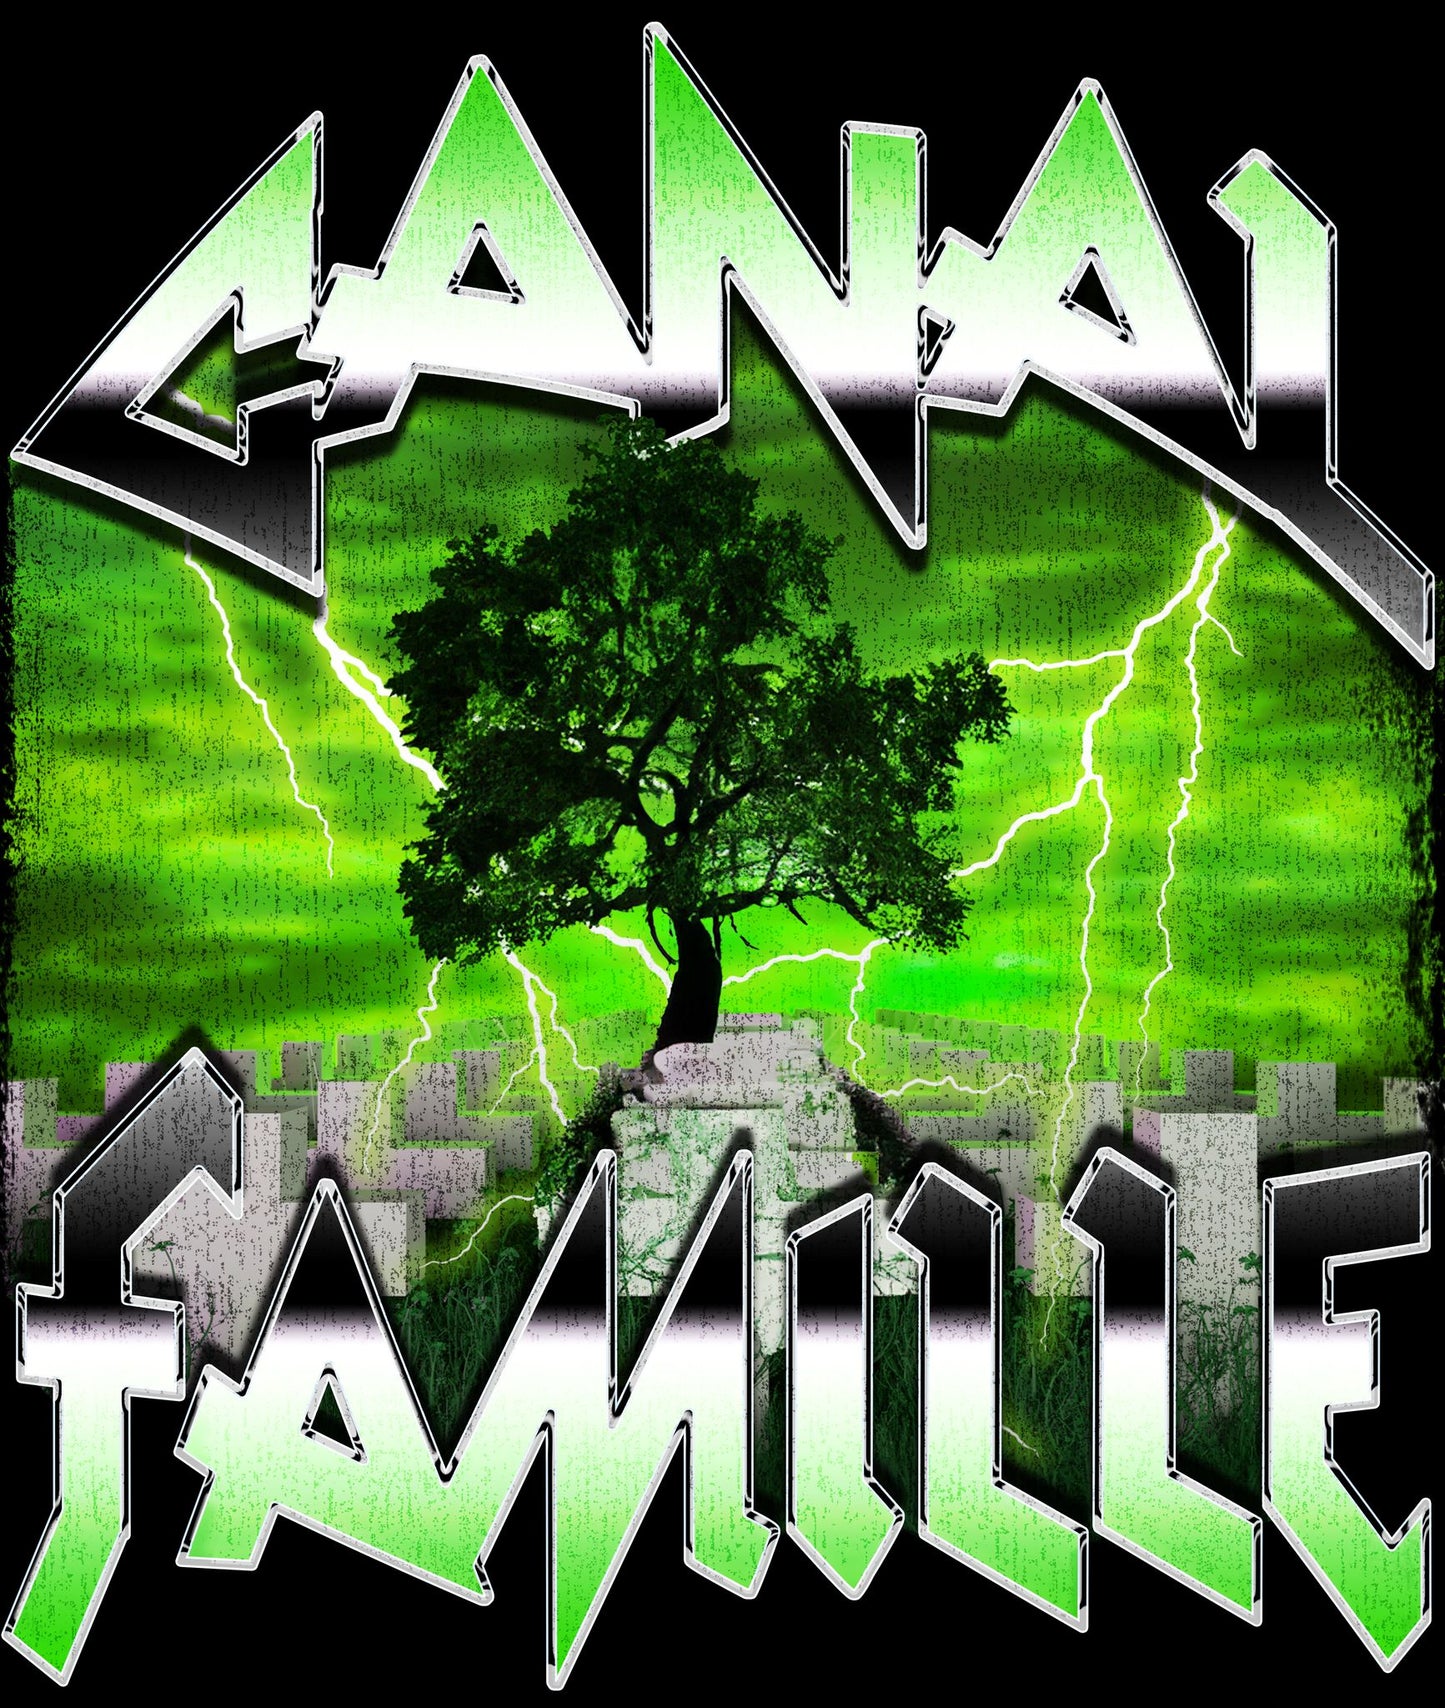 Canal Famille (Metal T-Shirt)